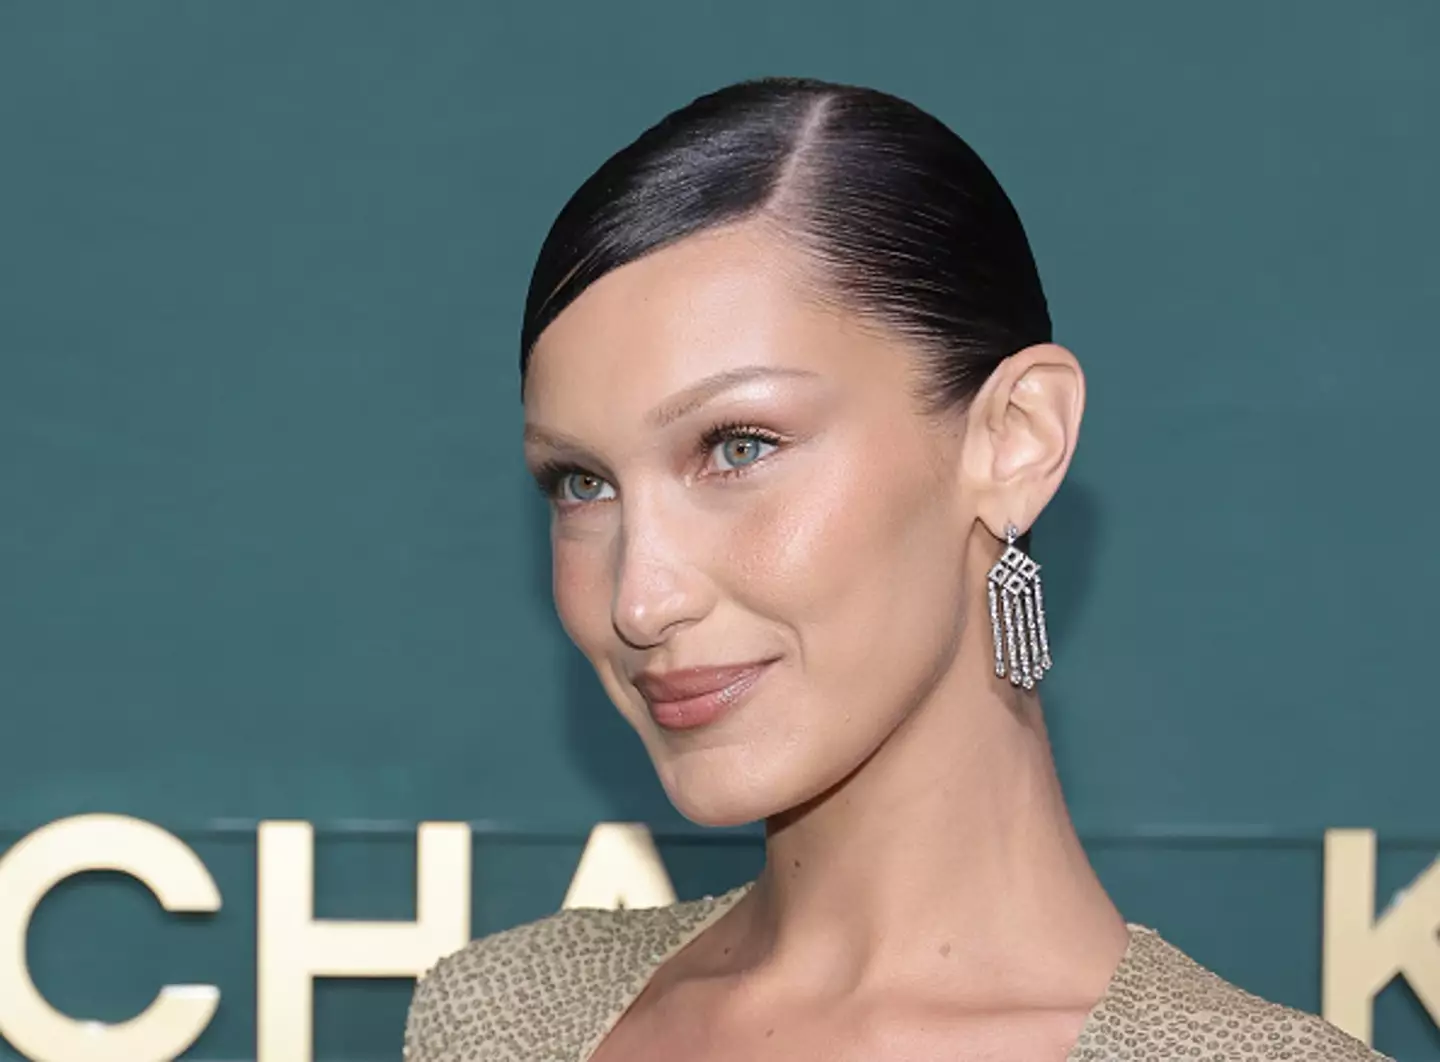 Bella Hadid was first diagnosed with Lyme disease in 2012.